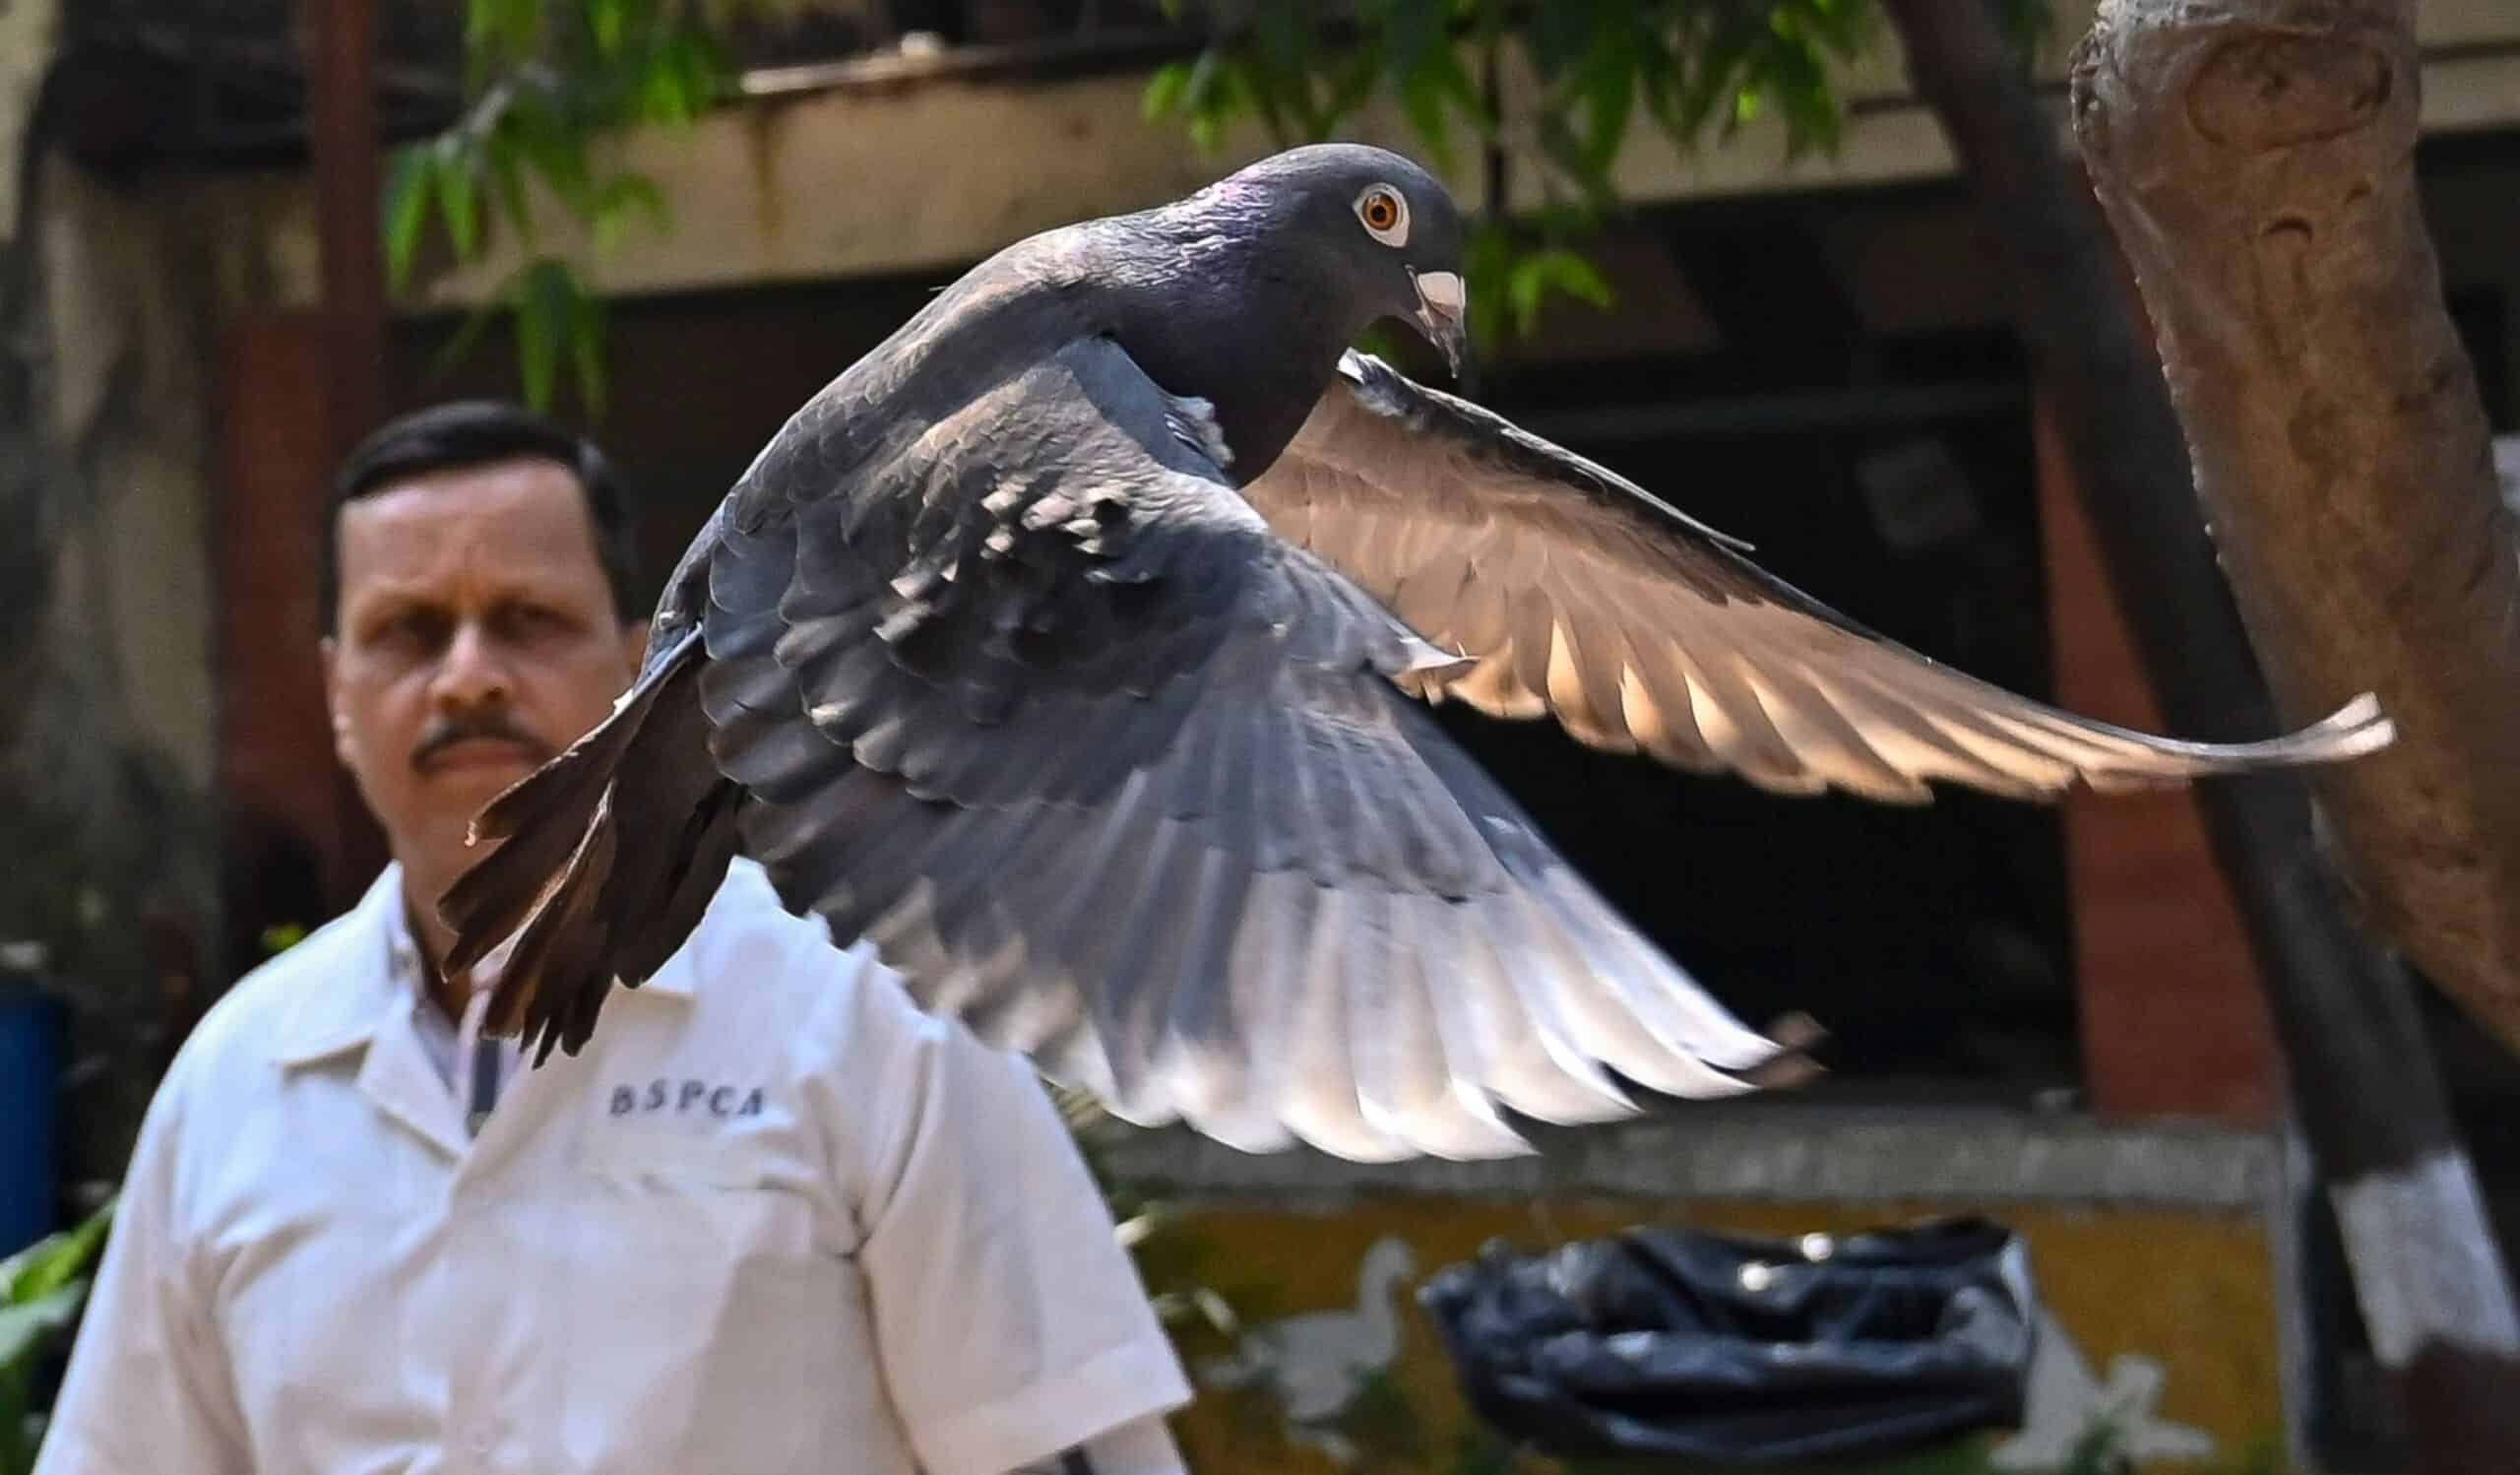 Pigeon accused of being Chinese spy released by police after months in bird lockup